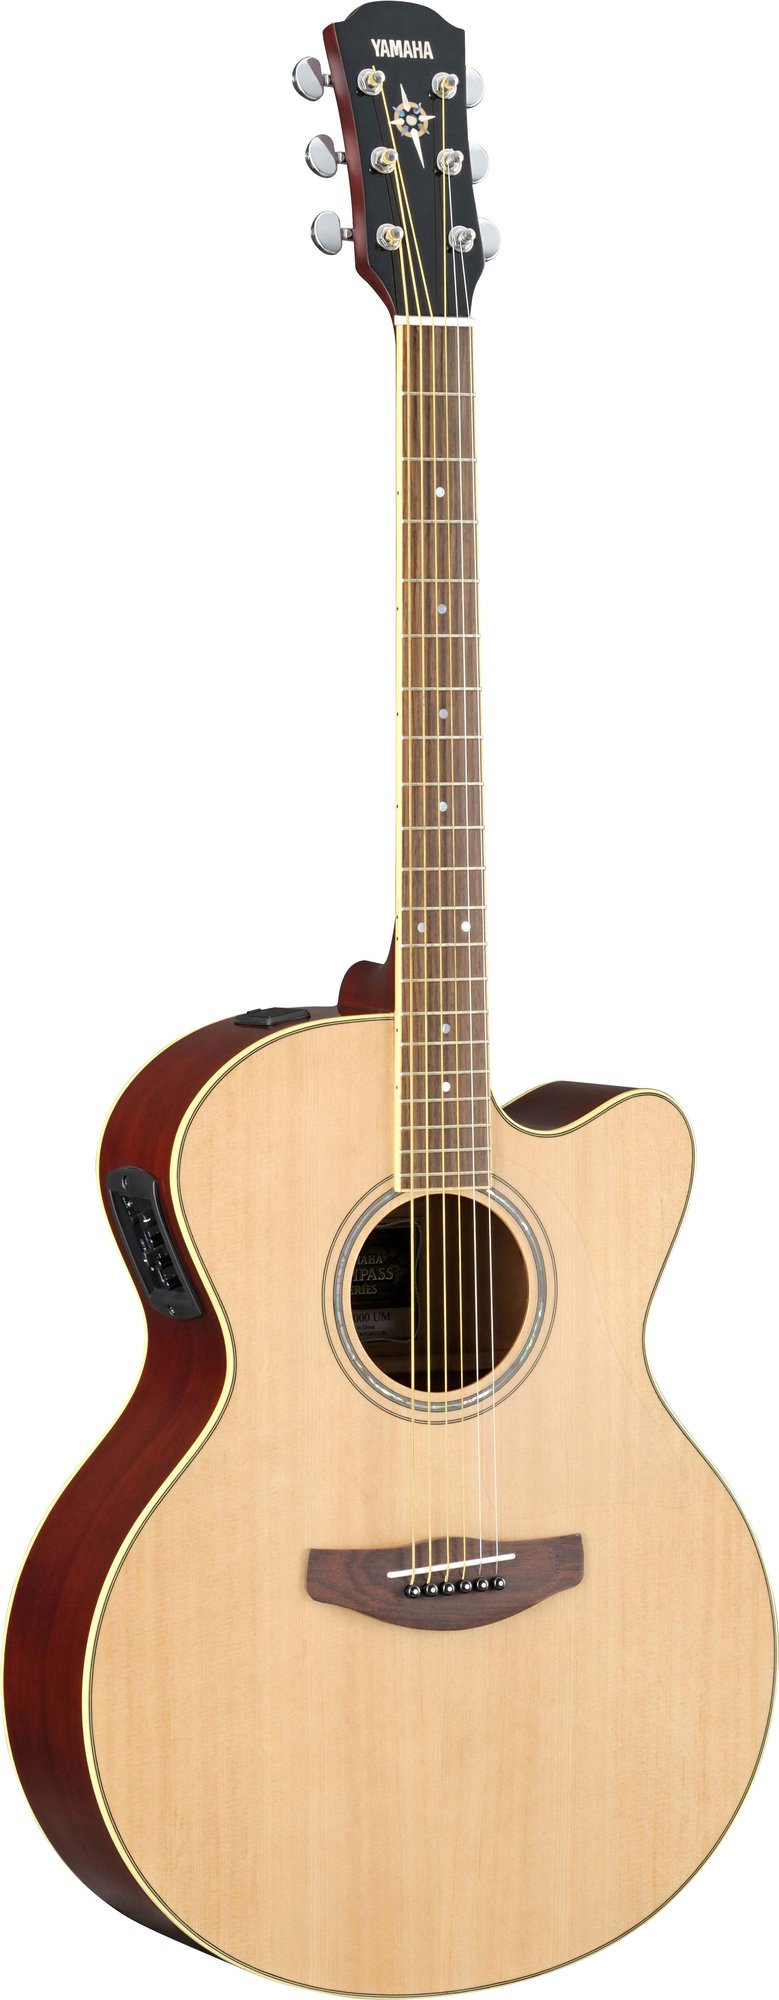 Yamaha CPX500III Acoustic-Electric Guitar, Natural